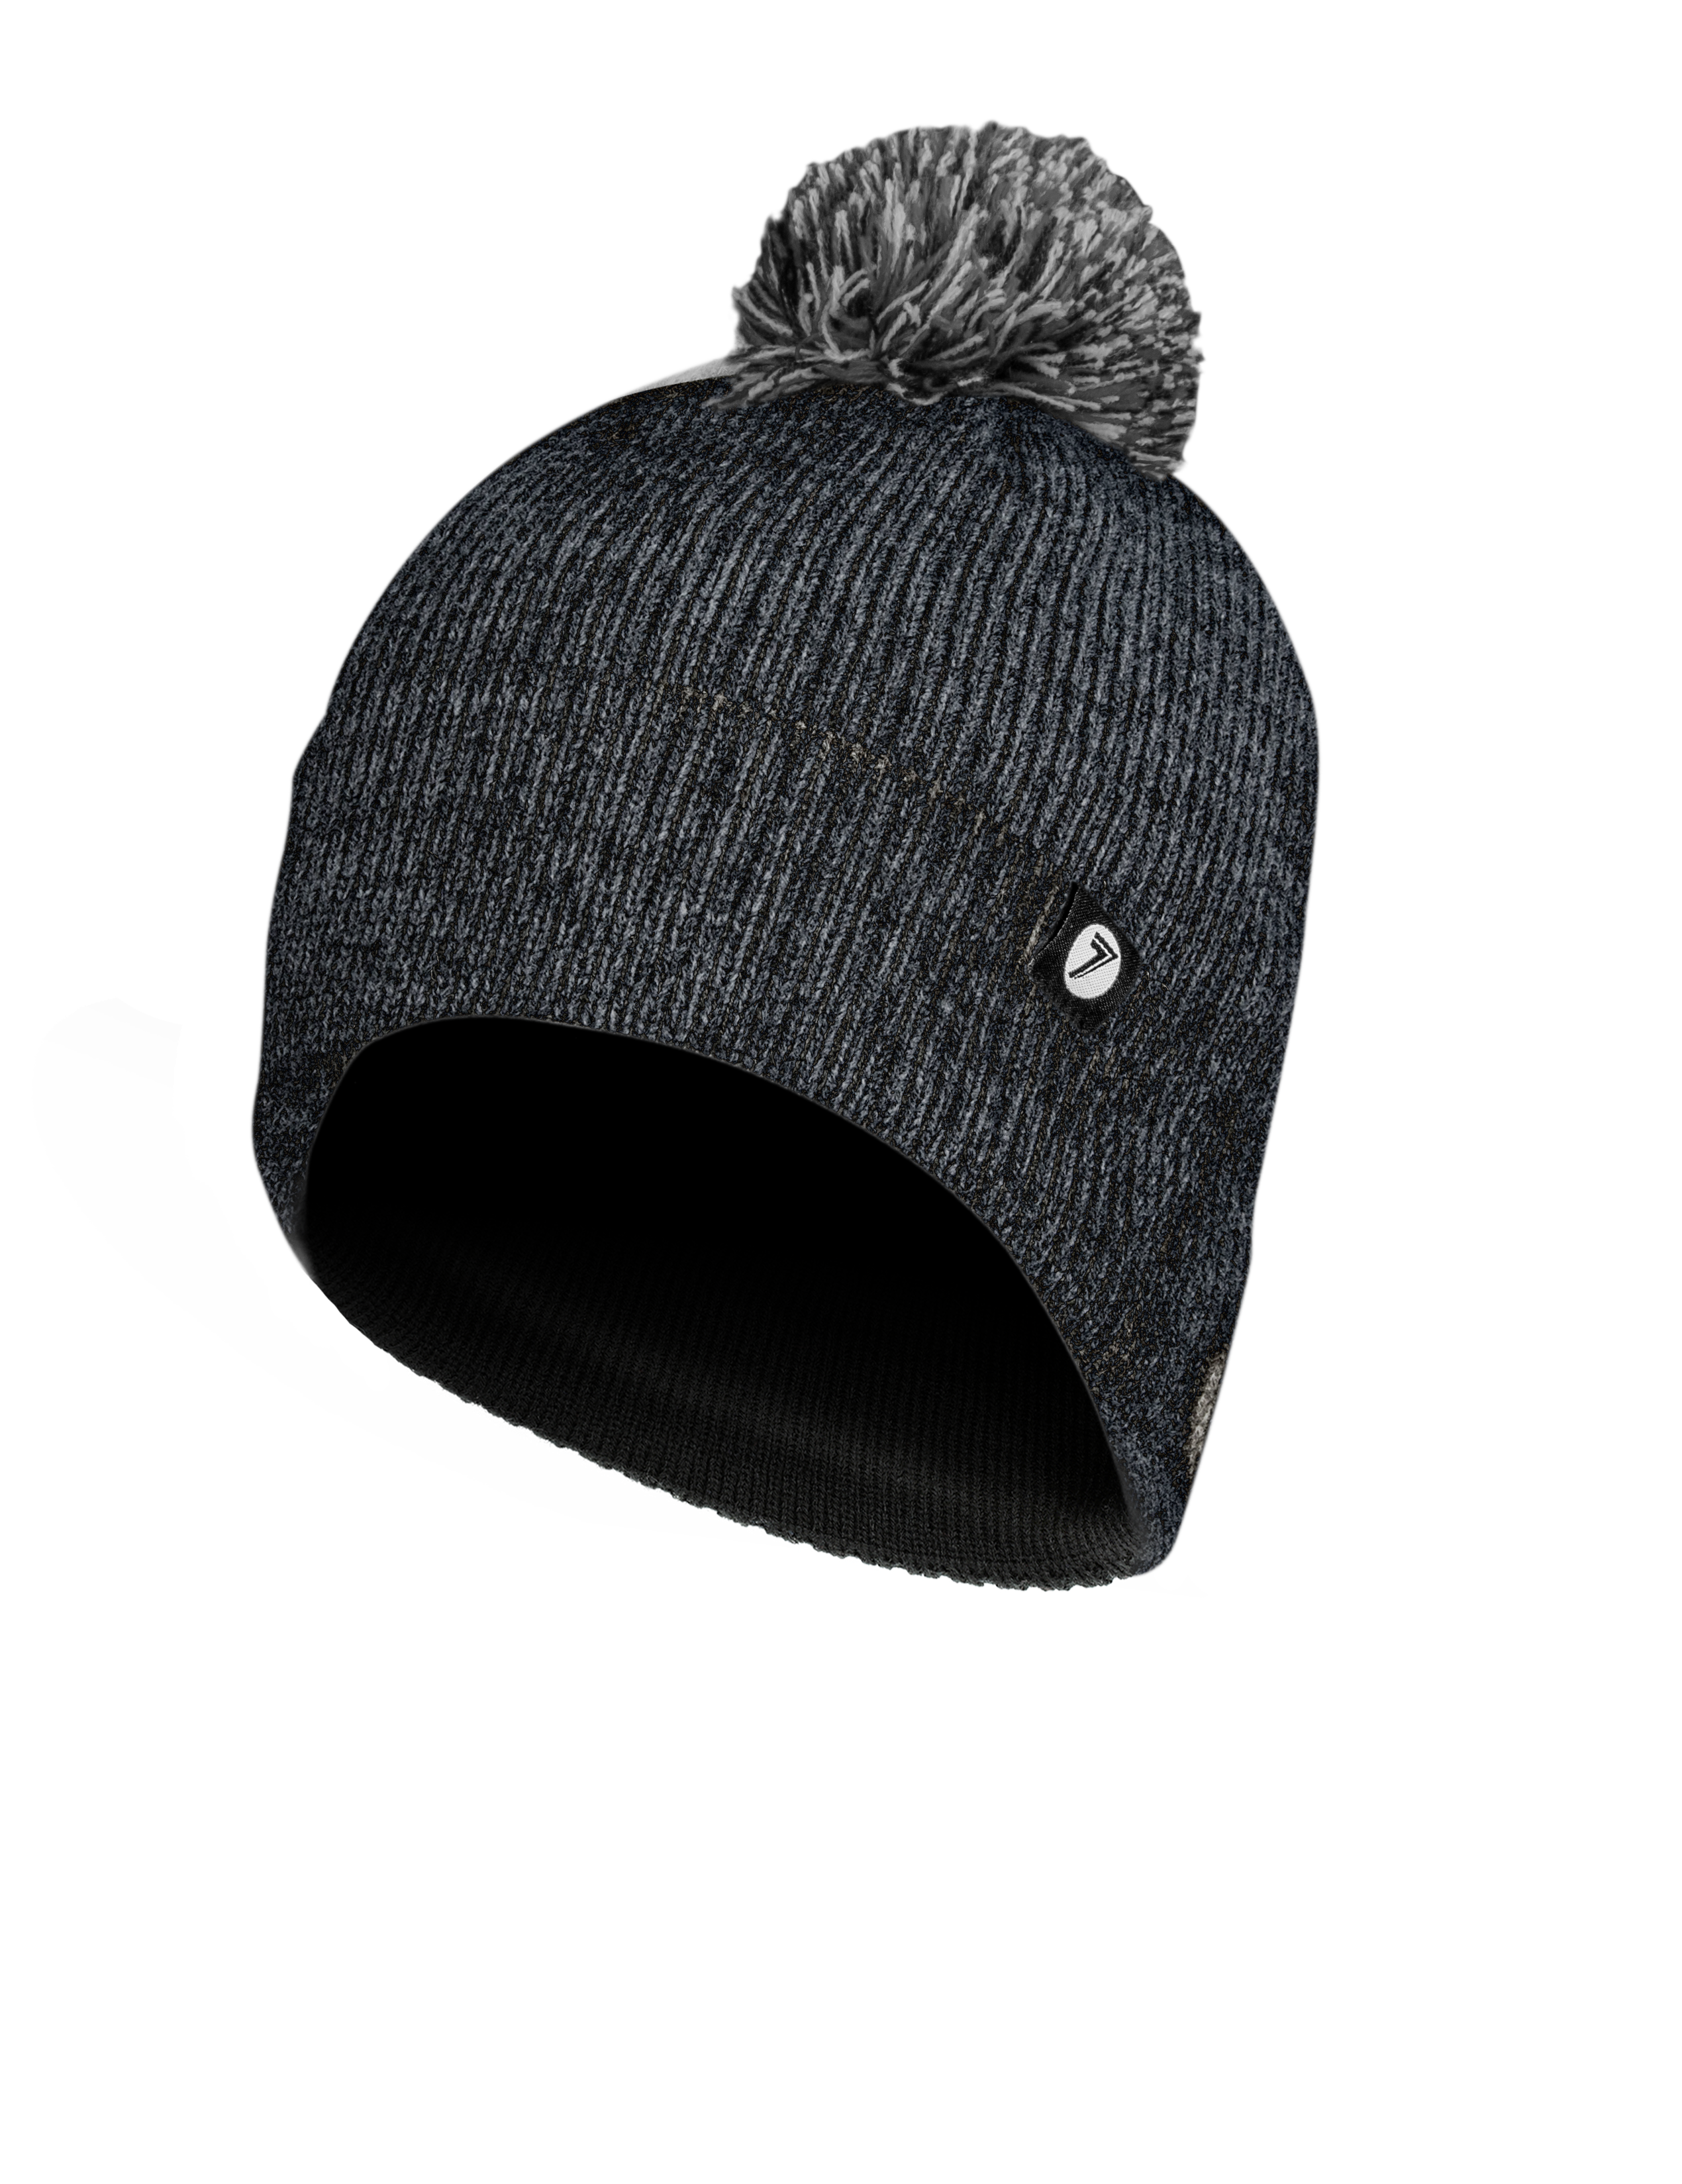 Defined Beanie Charcoal Heather